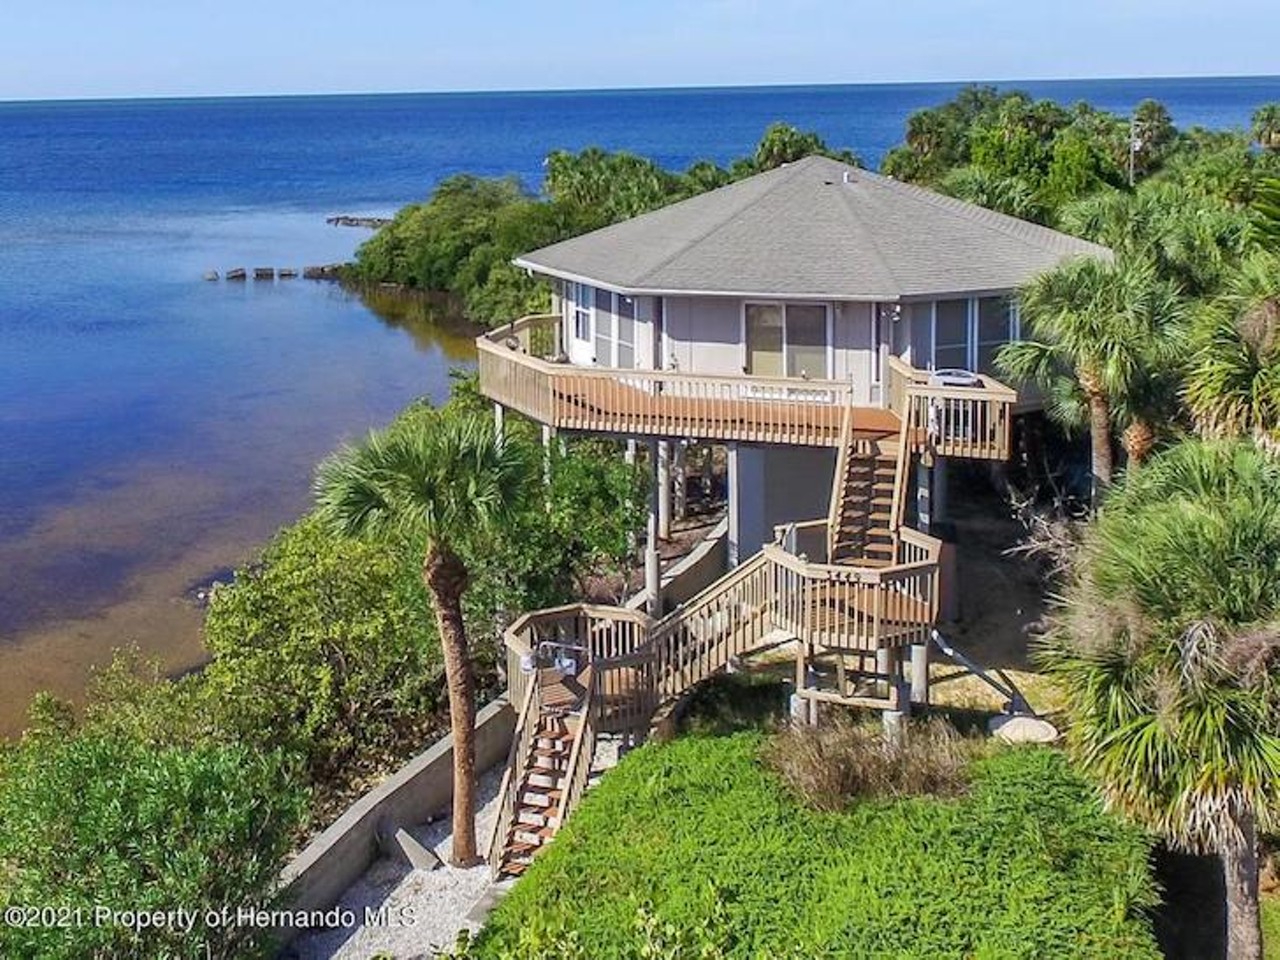 A rare mushroom-style Topsider home is now for sale in Hernando County